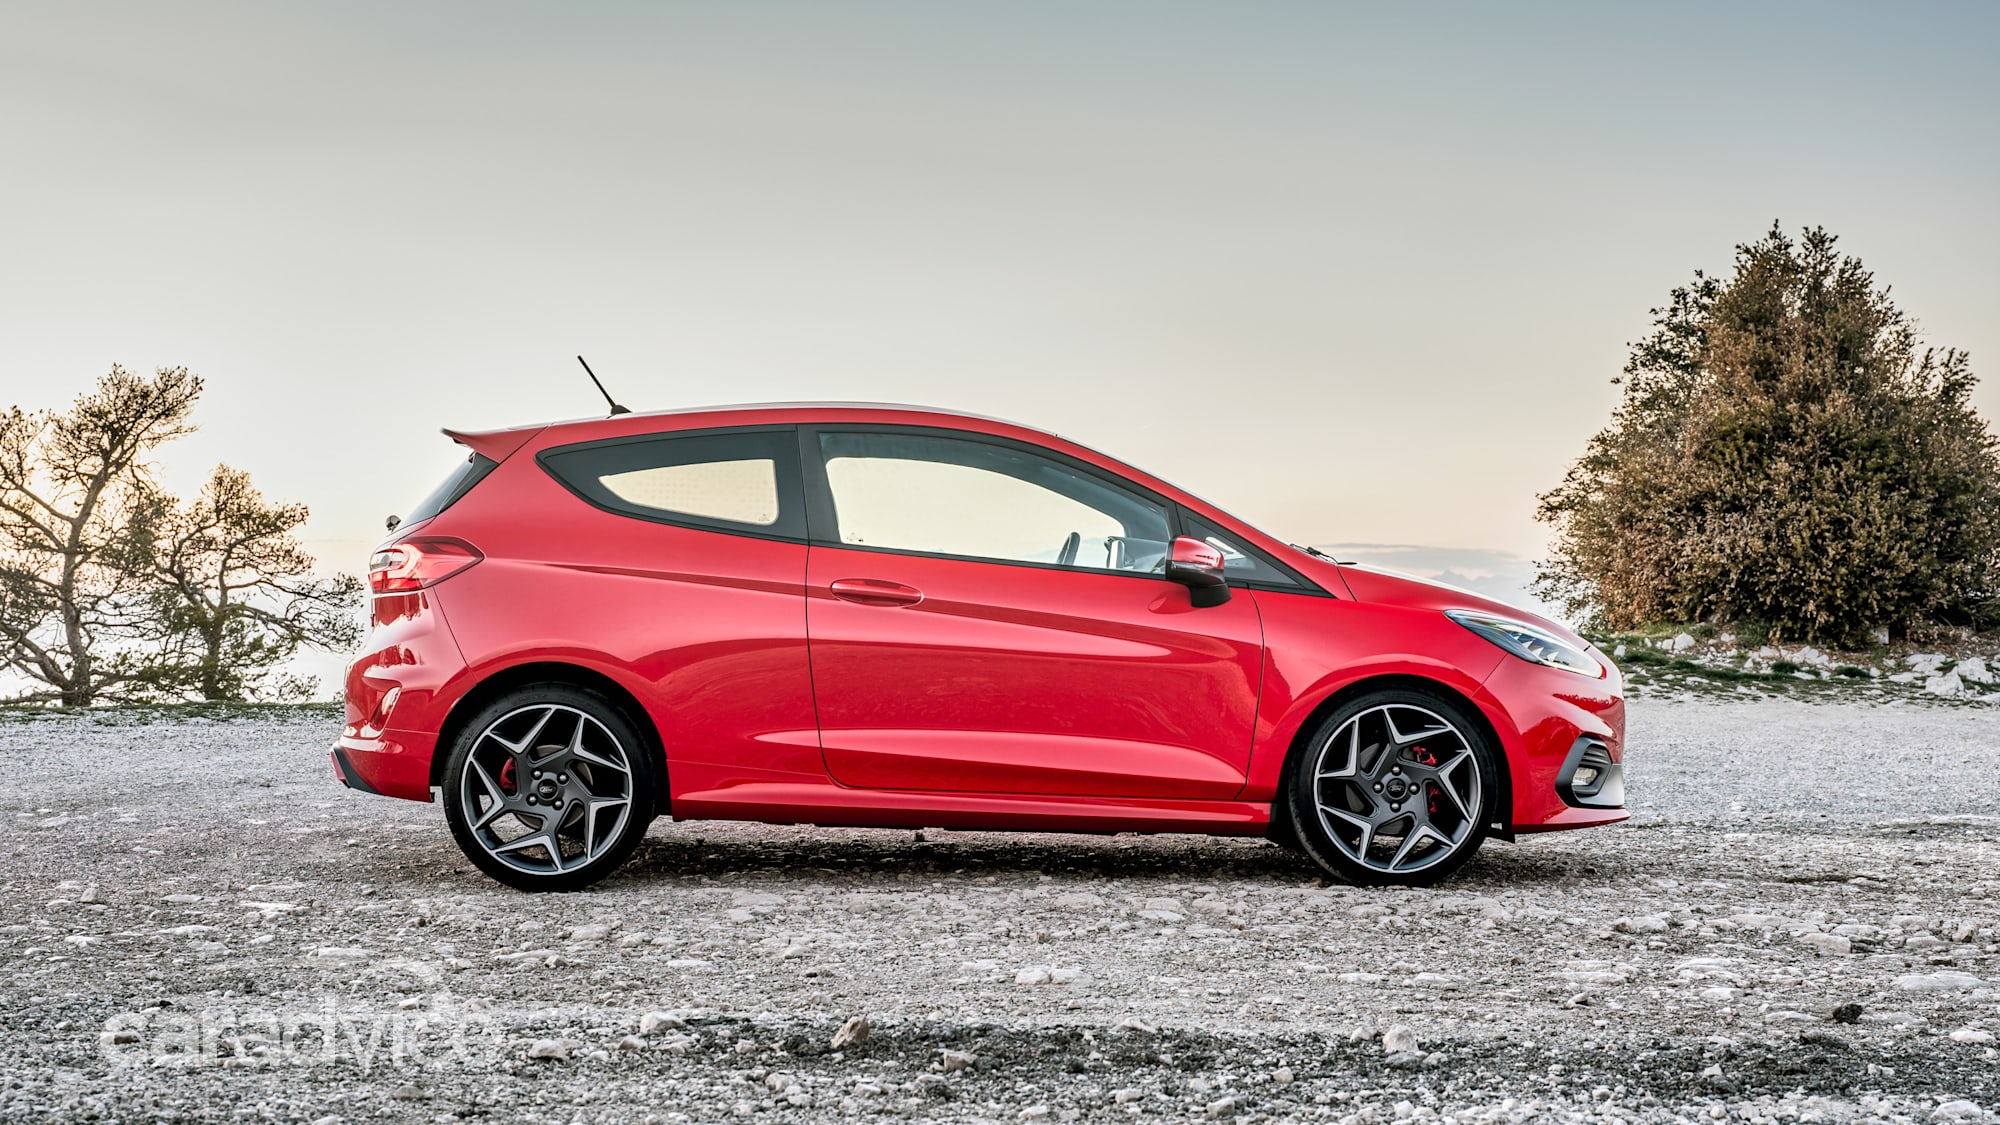 2019 Ford Fiesta St Review Caradvice